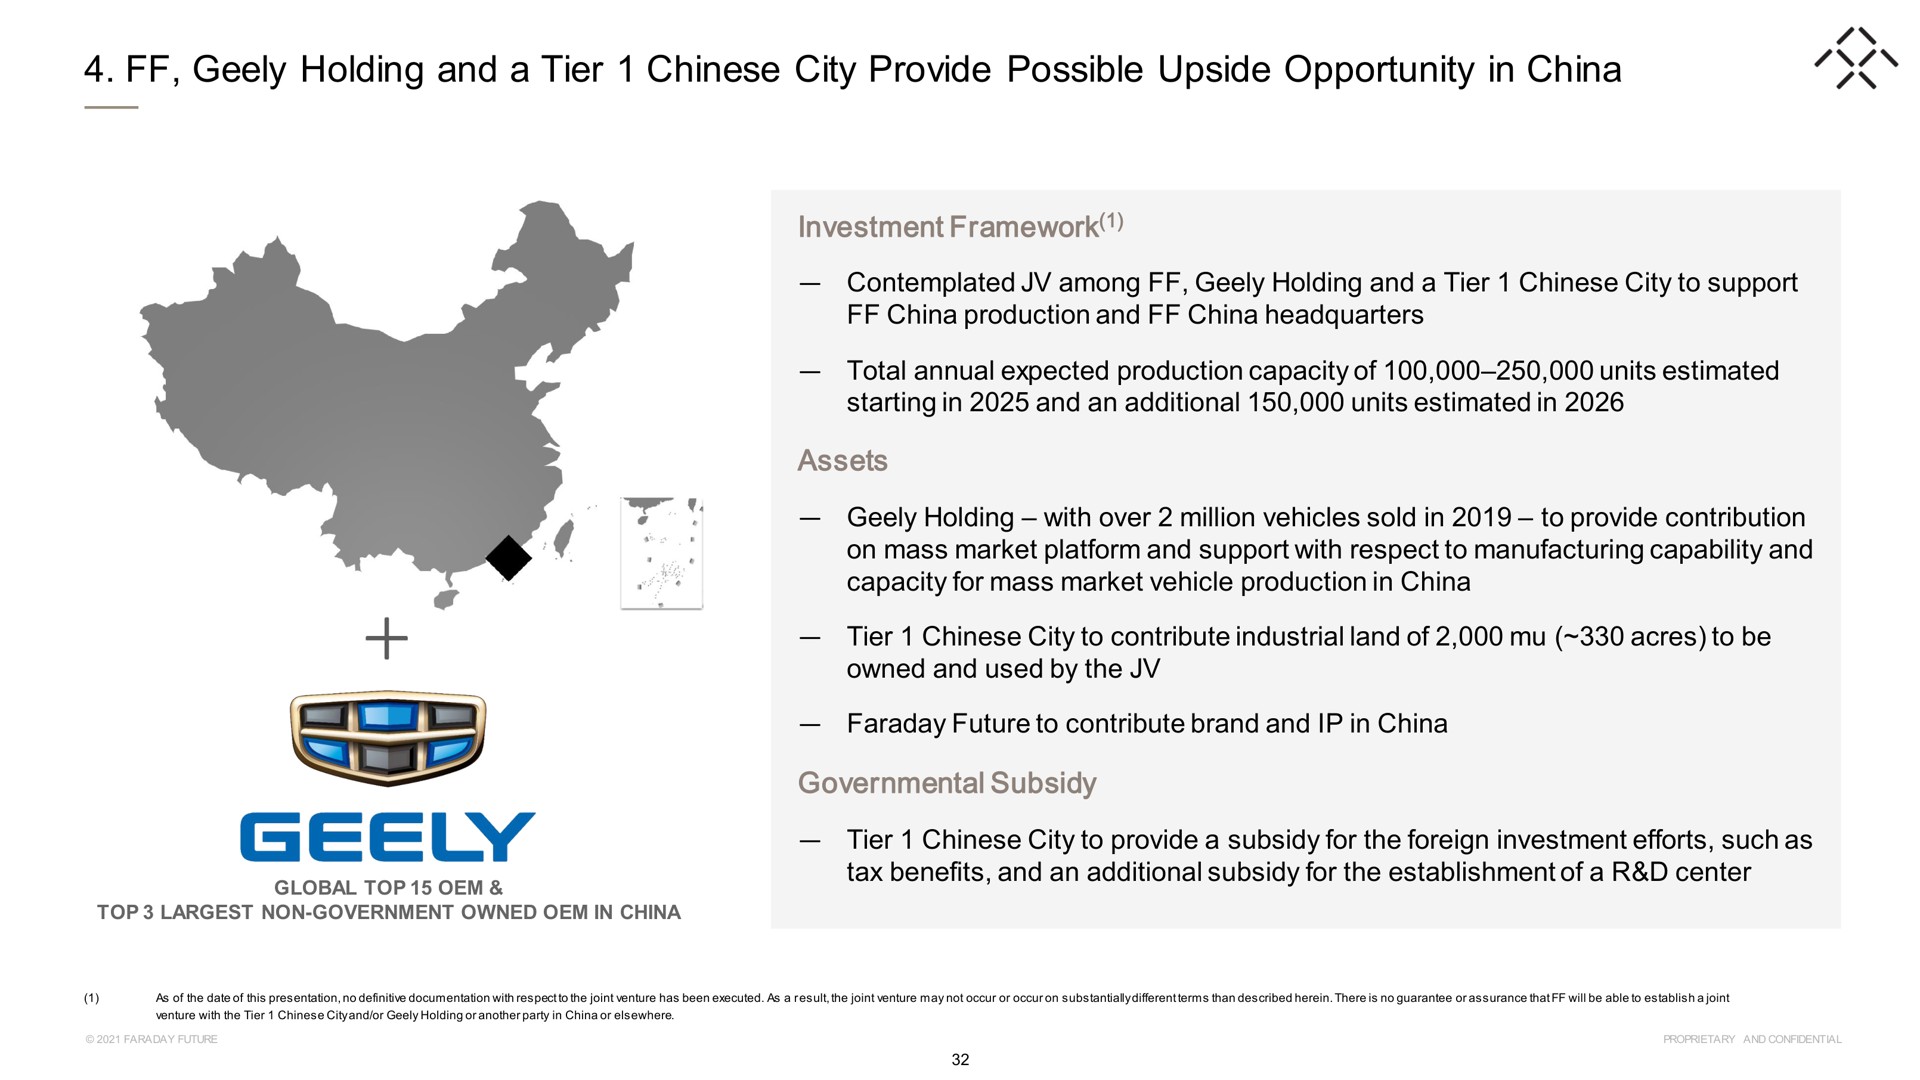 holding and a tier city provide possible upside opportunity in china investment framework assets governmental subsidy | Faraday Future